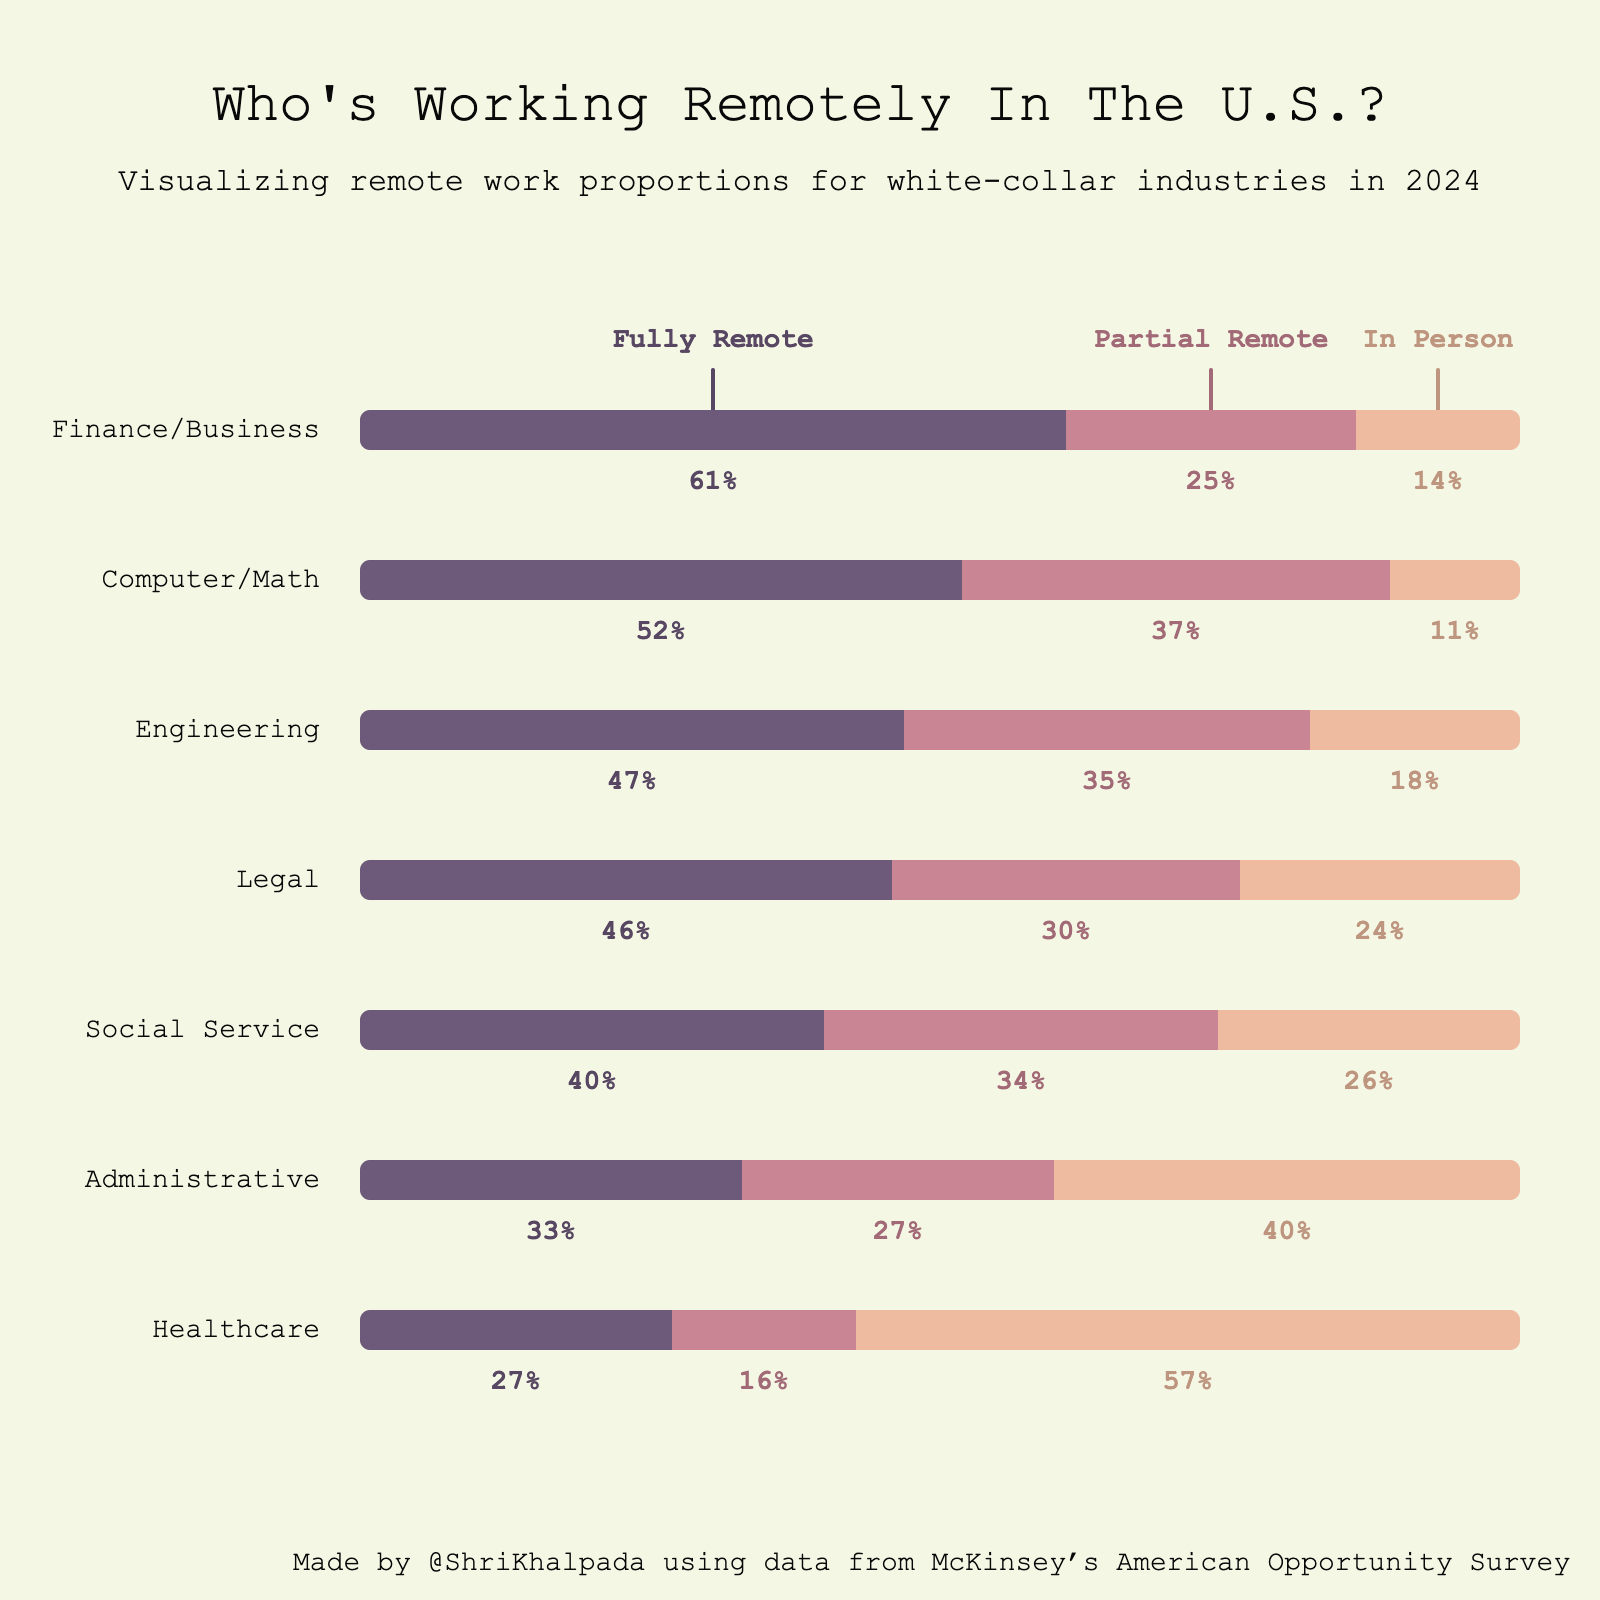 A bar graph titled "Who's Working Remotely In The U.S.?" showing percentages of remote, partial remote, and in-person work across various white-collar industries.